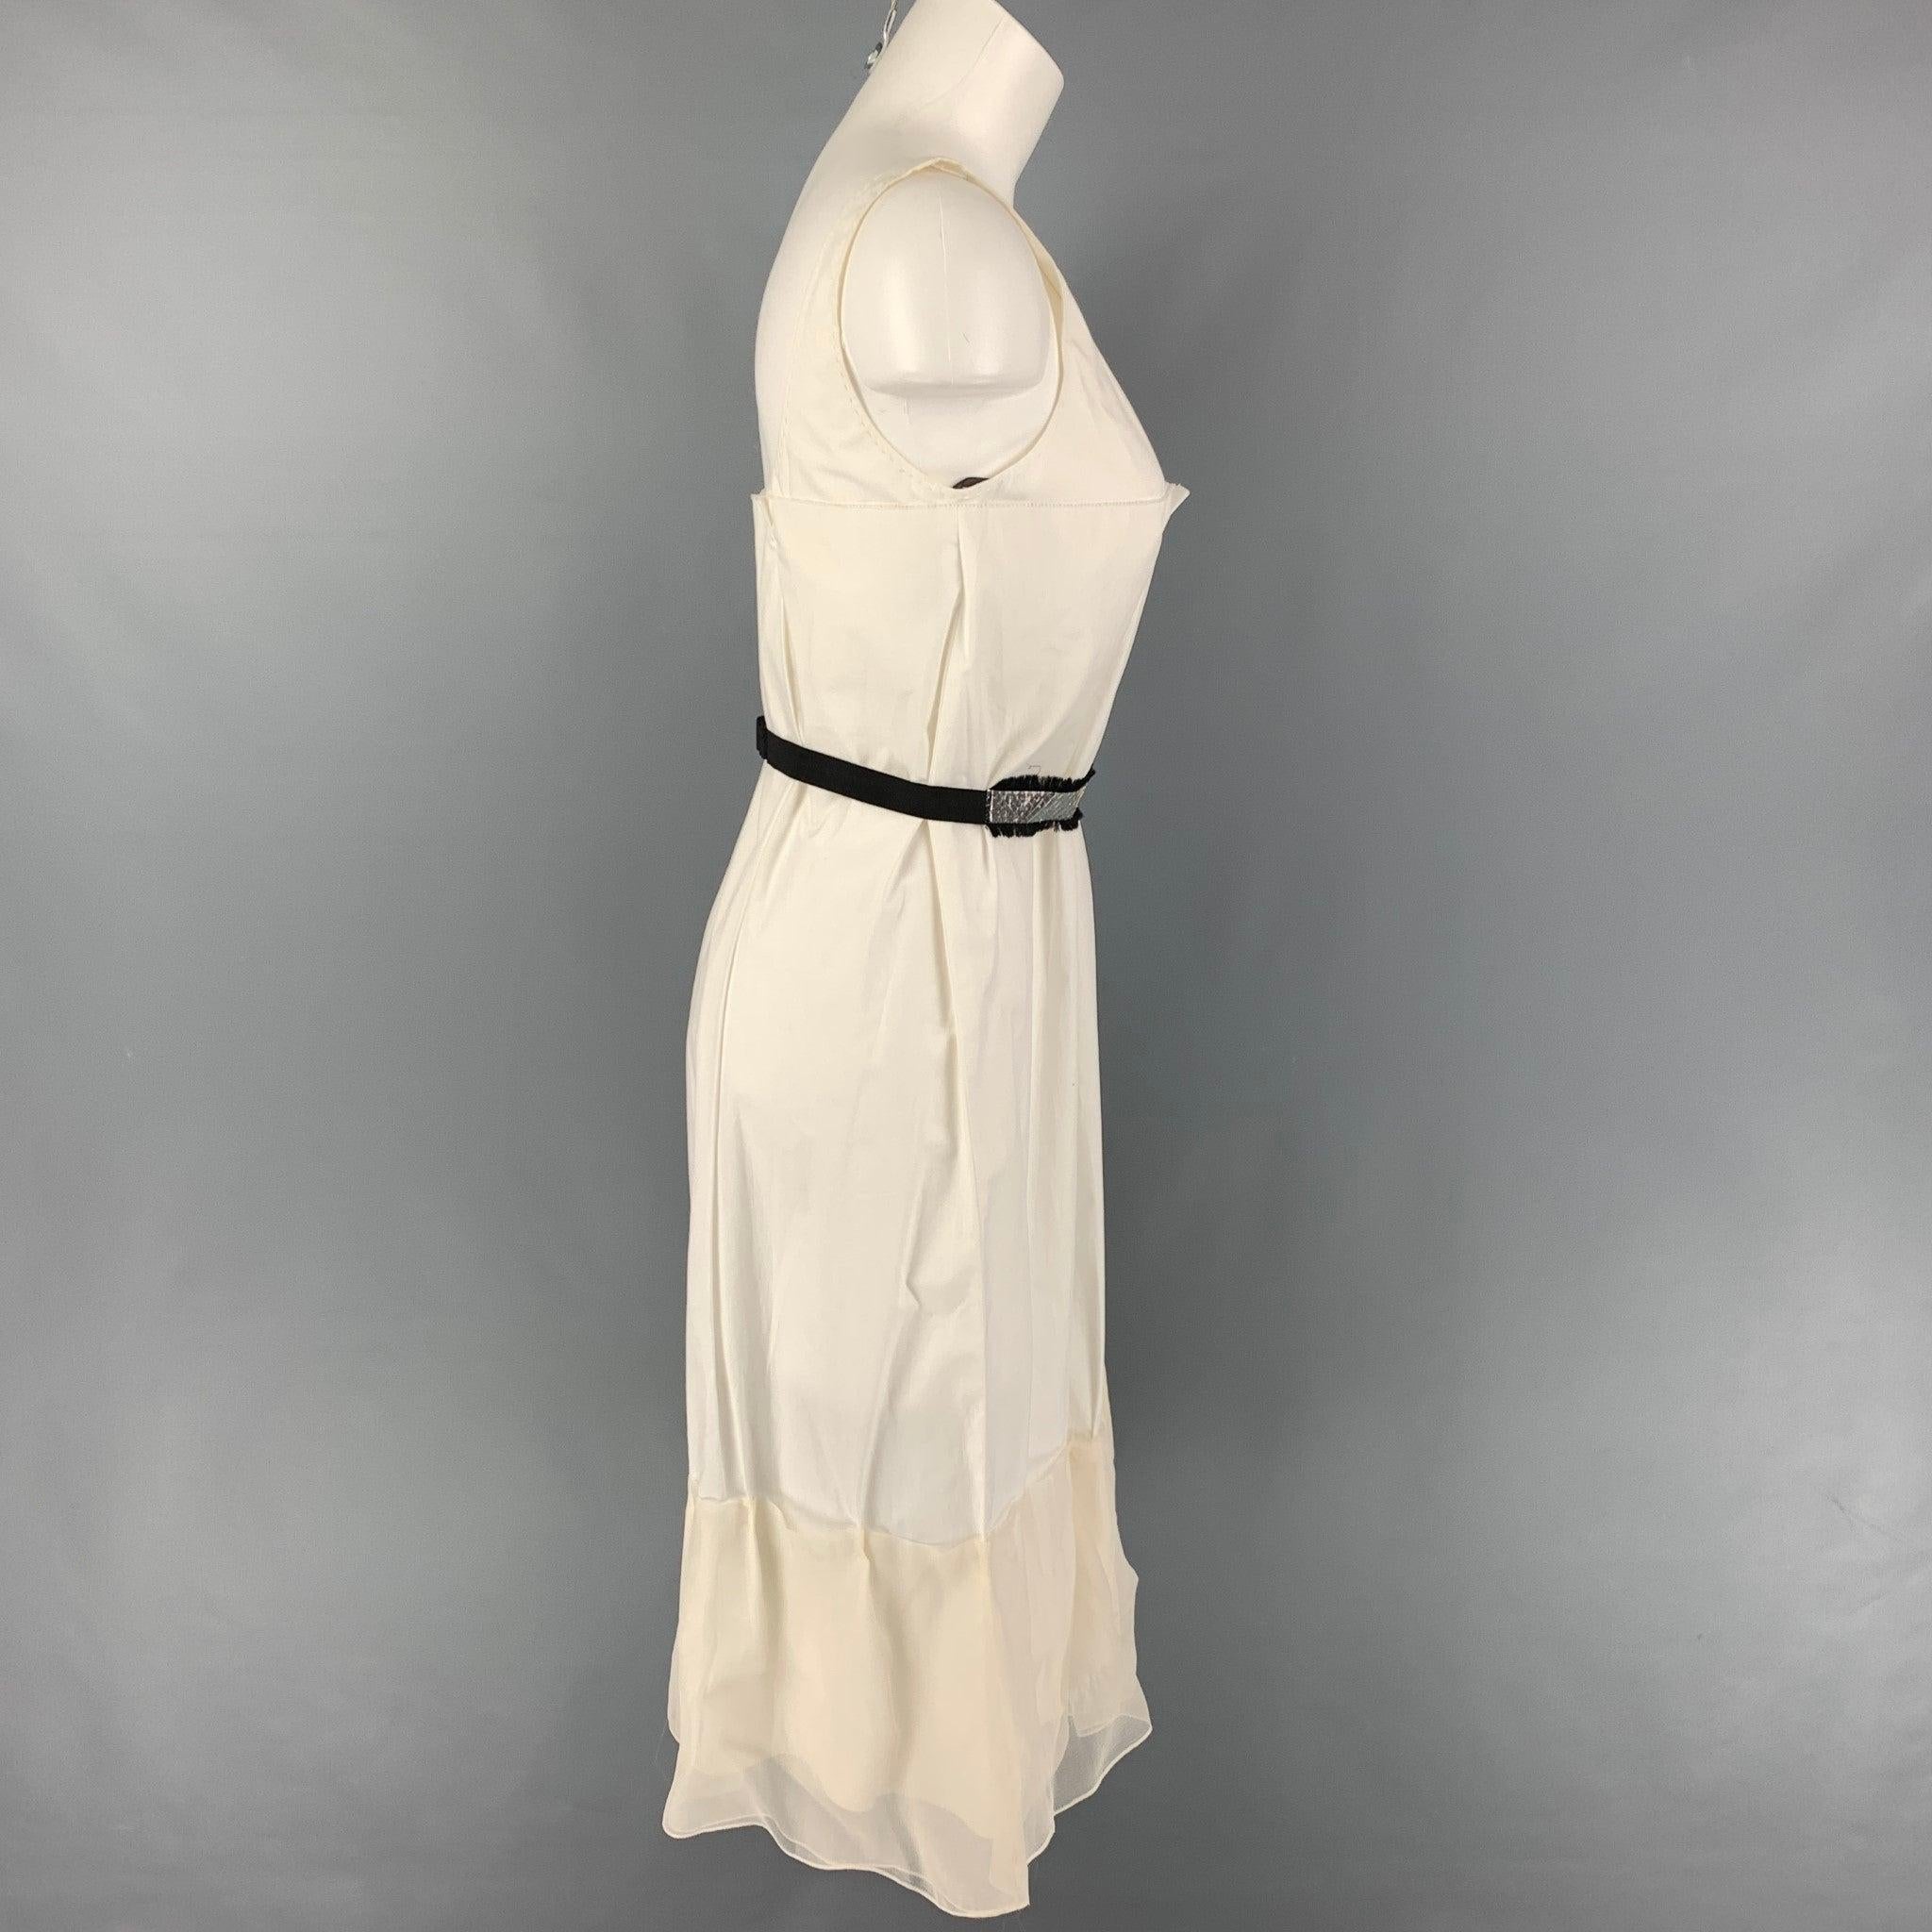 VERA WANG dress comes in a white cotton featuring pleated style, mesh ruffled trim, silver belt, and a side zipper closure.
Very Good
Pre-Owned Condition. 

Marked:   2 

Measurements: 
  Bust: 30 inches  Hip: 40 inches  Length: 34 inches 
  
  
